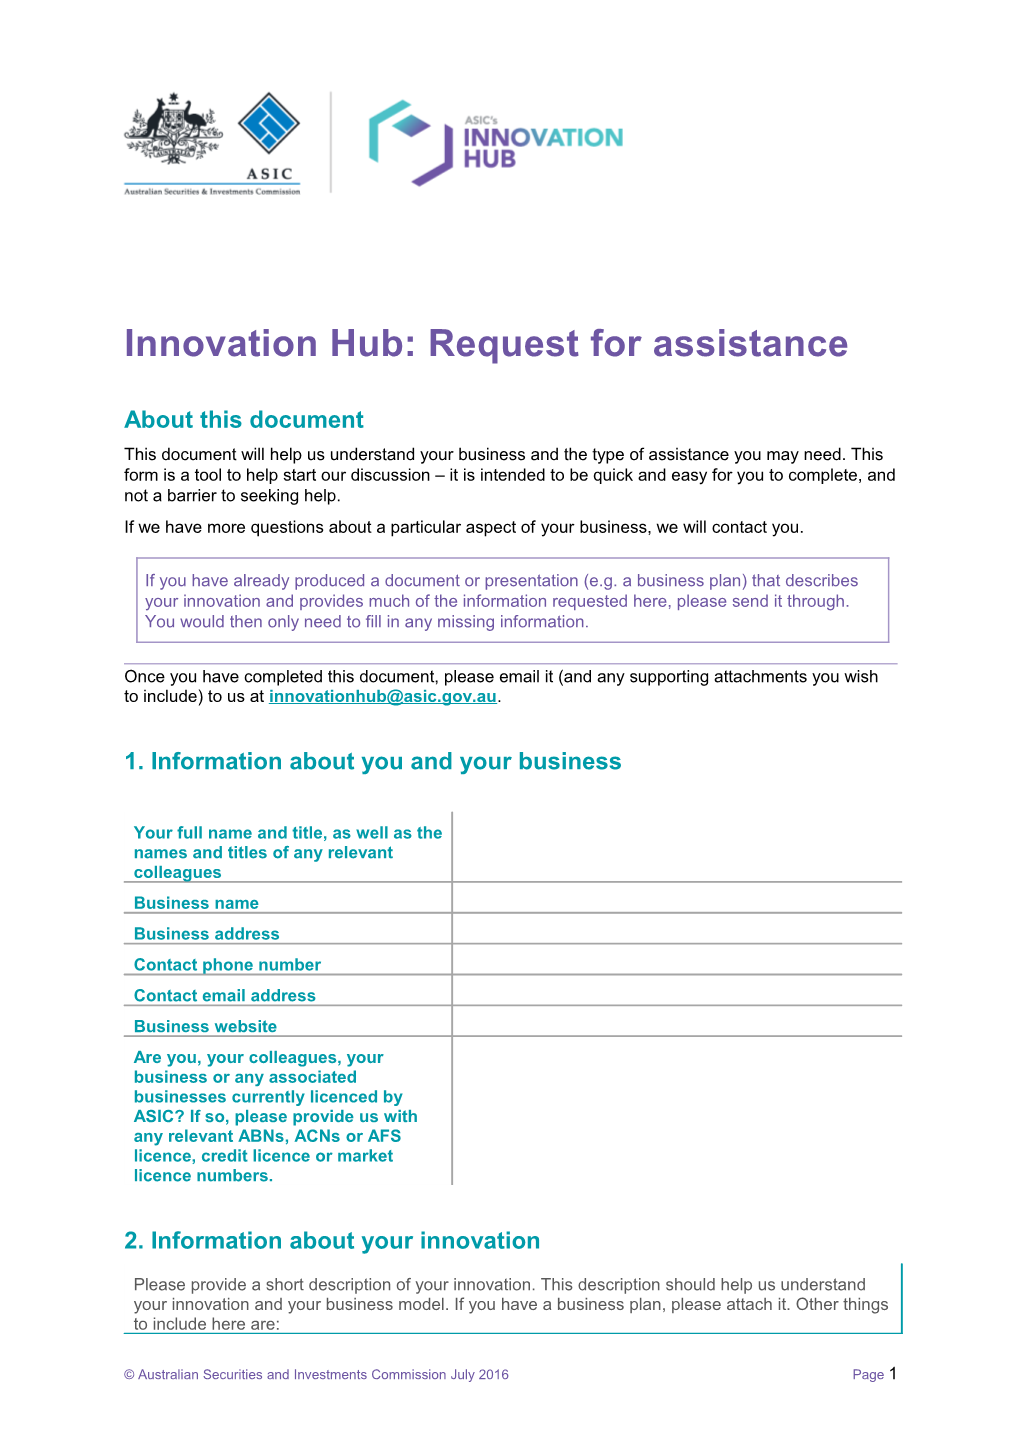 Innovation Hub - Request for Assistance